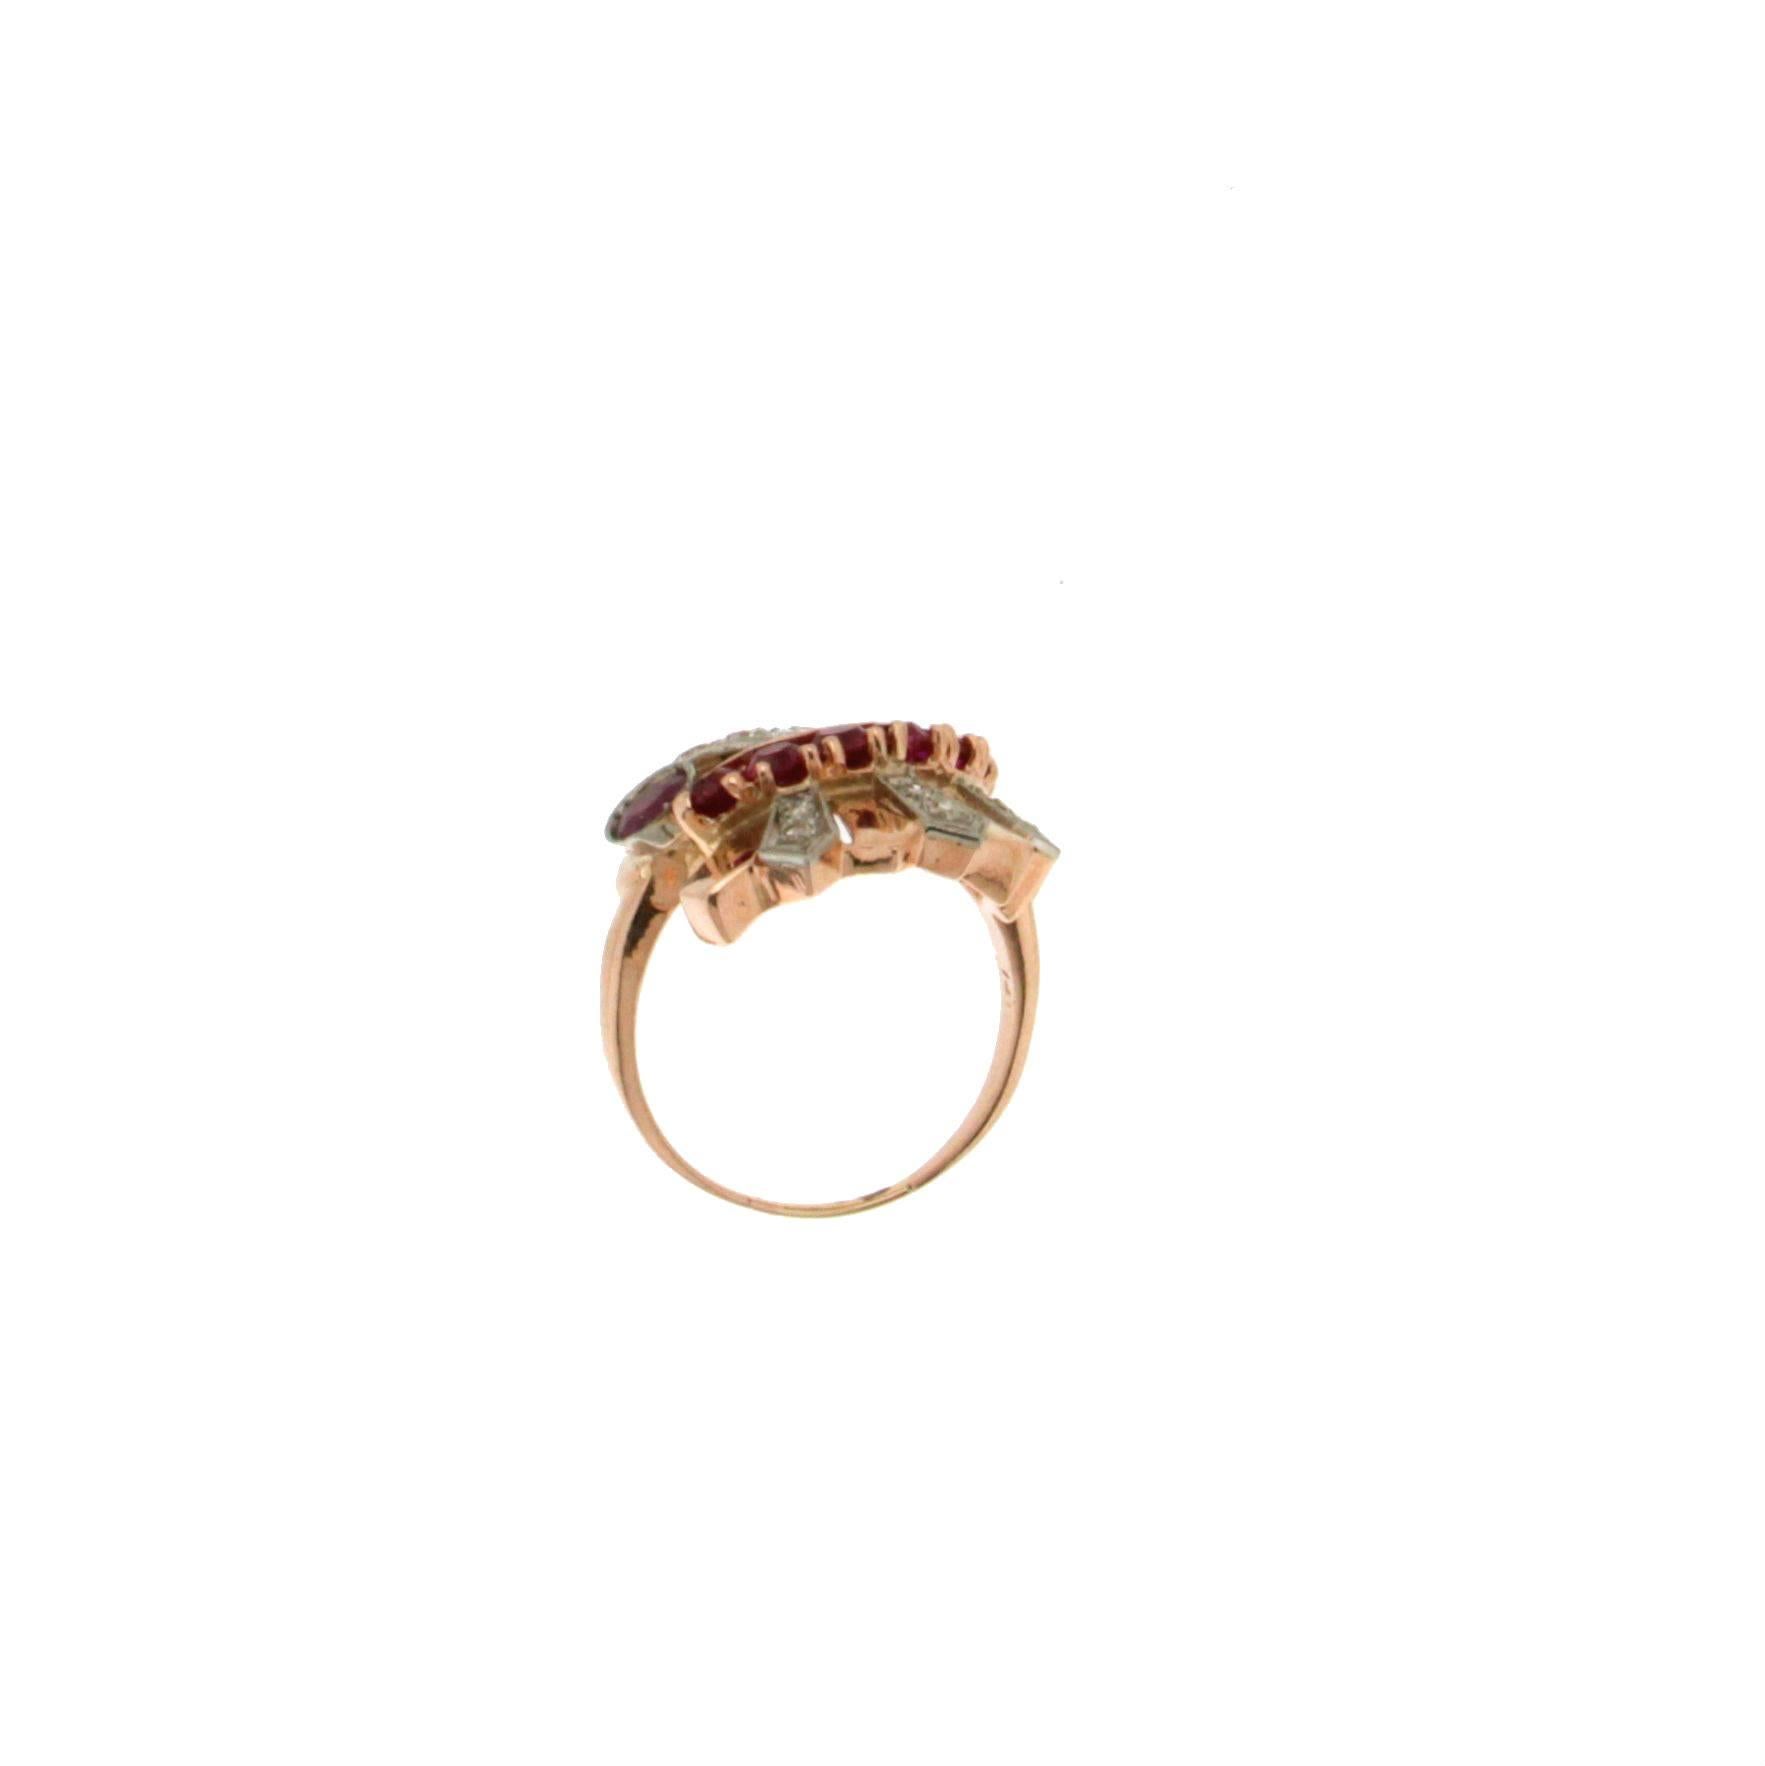 Brilliant Cut Handcraft Ruby 14 Karat Yellow and White Gold Diamonds Cocktail Ring